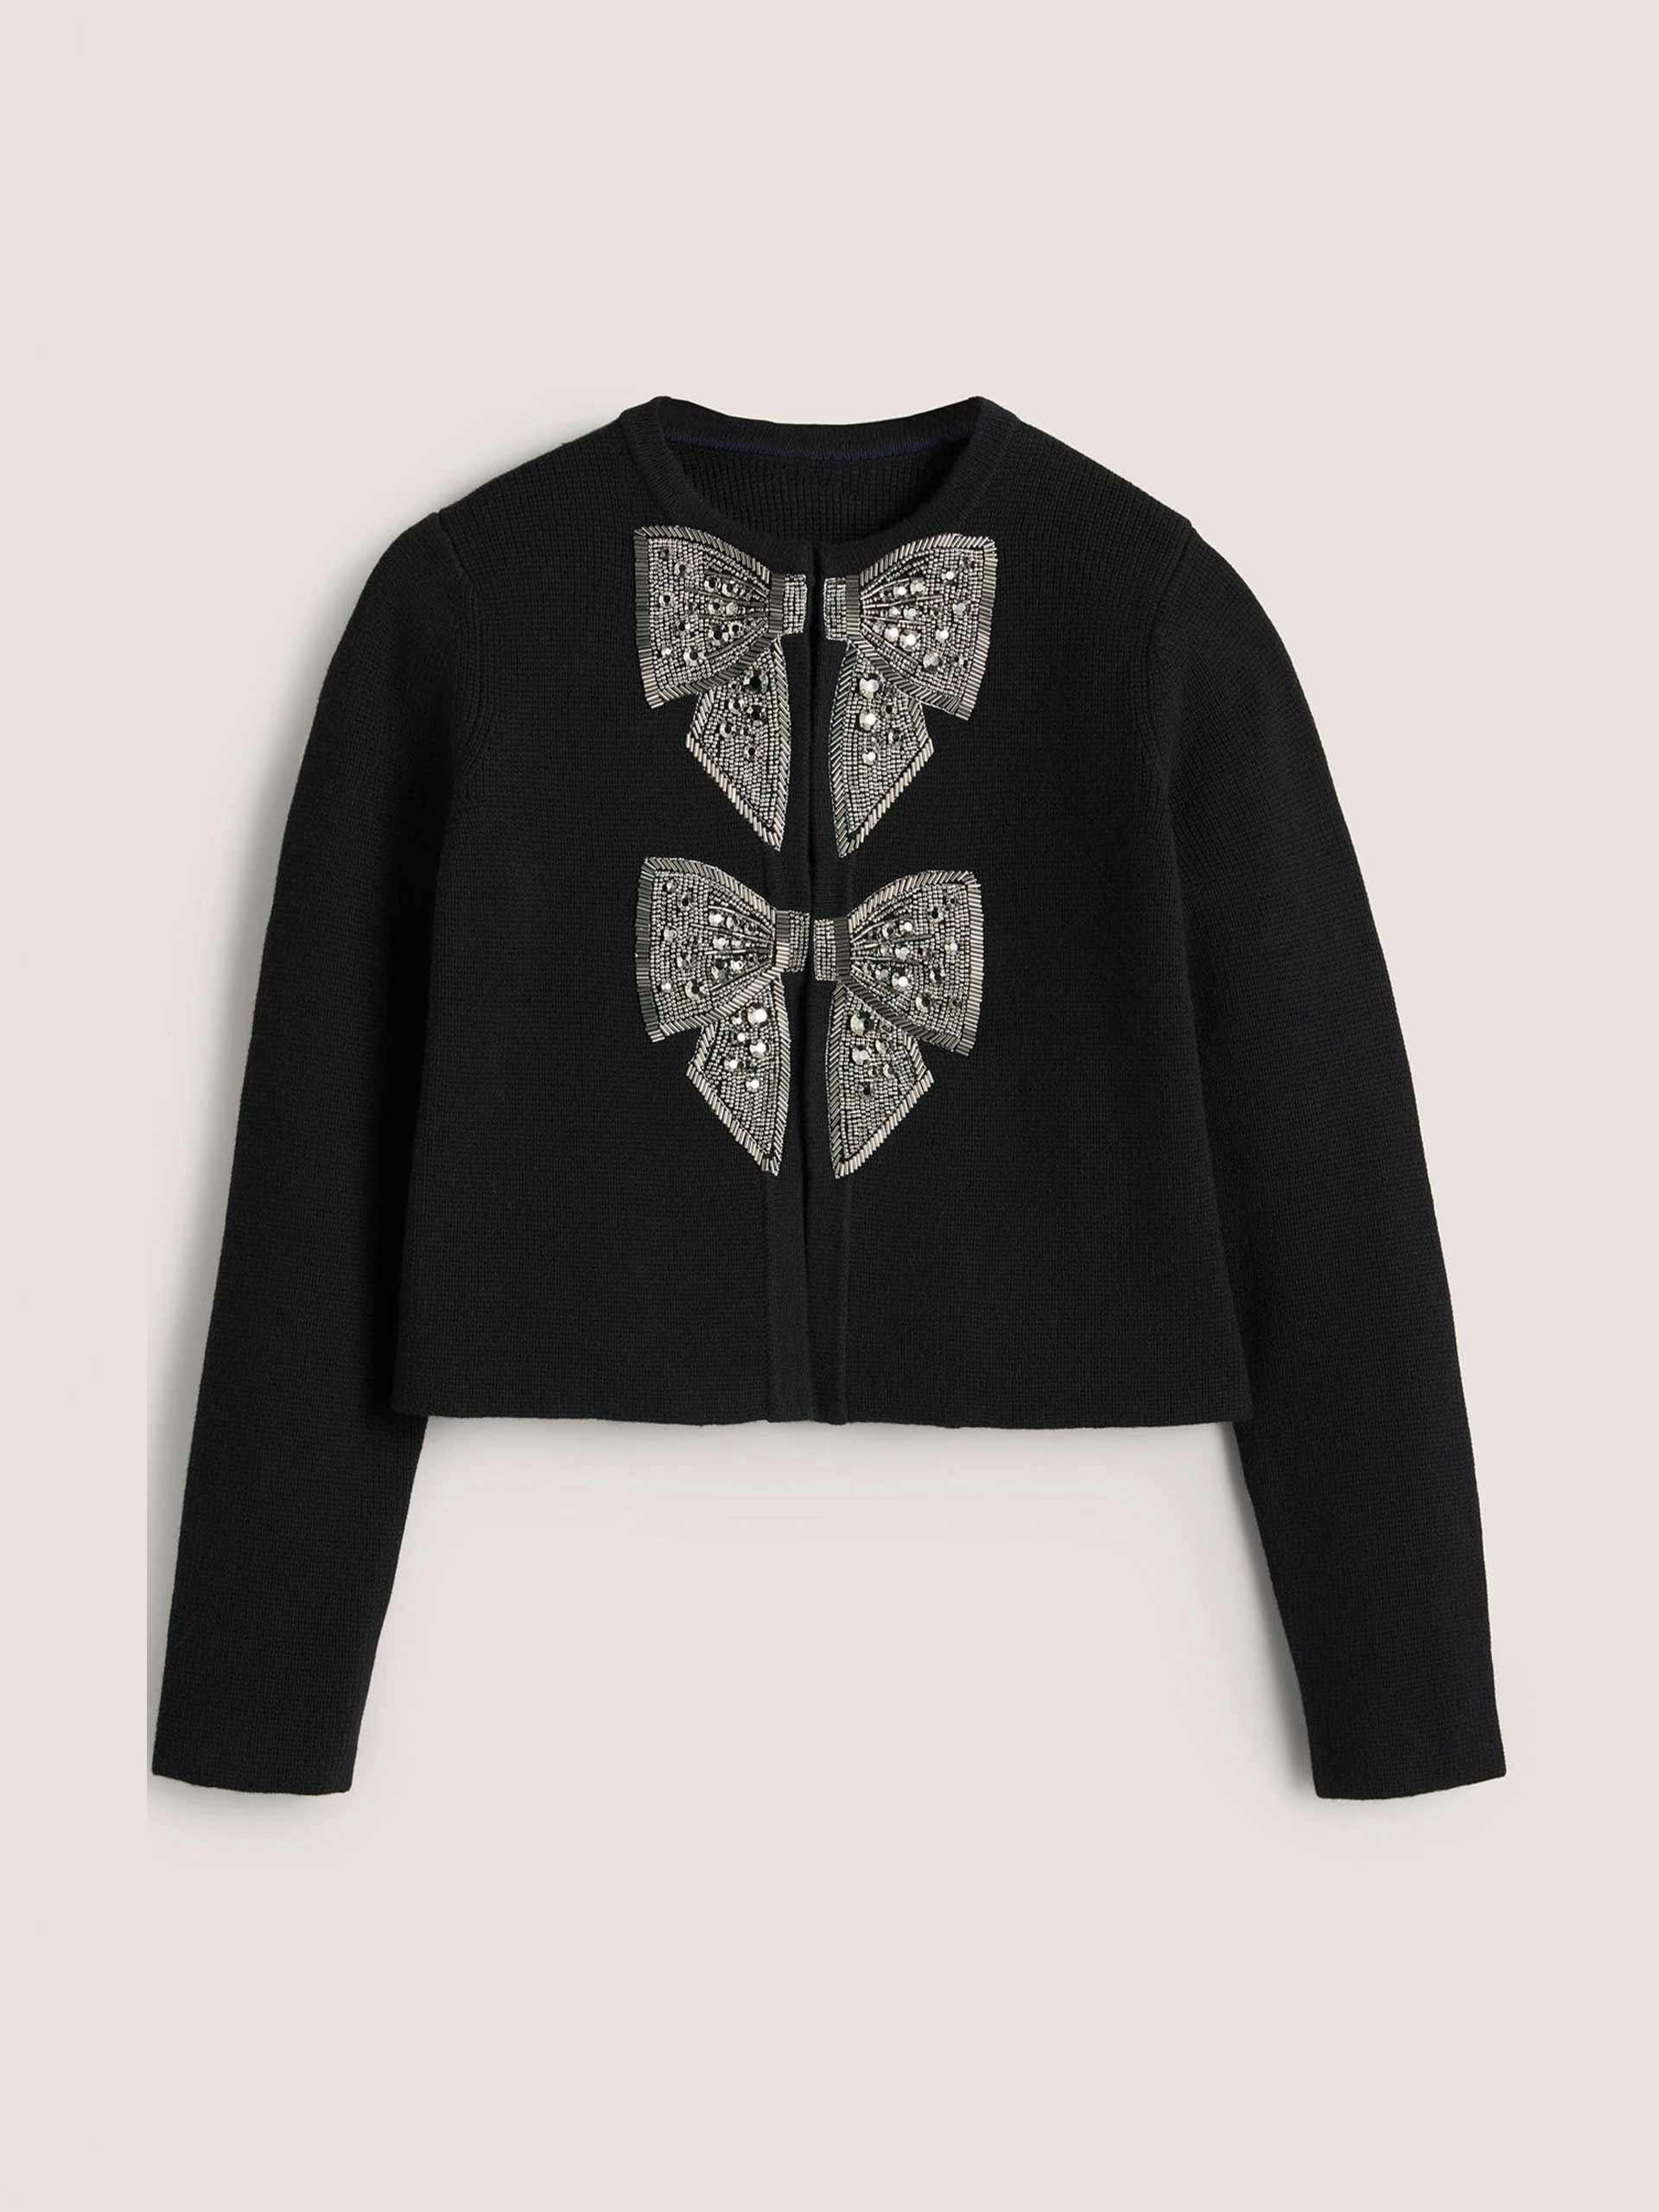 Knit jacket with embellished bows